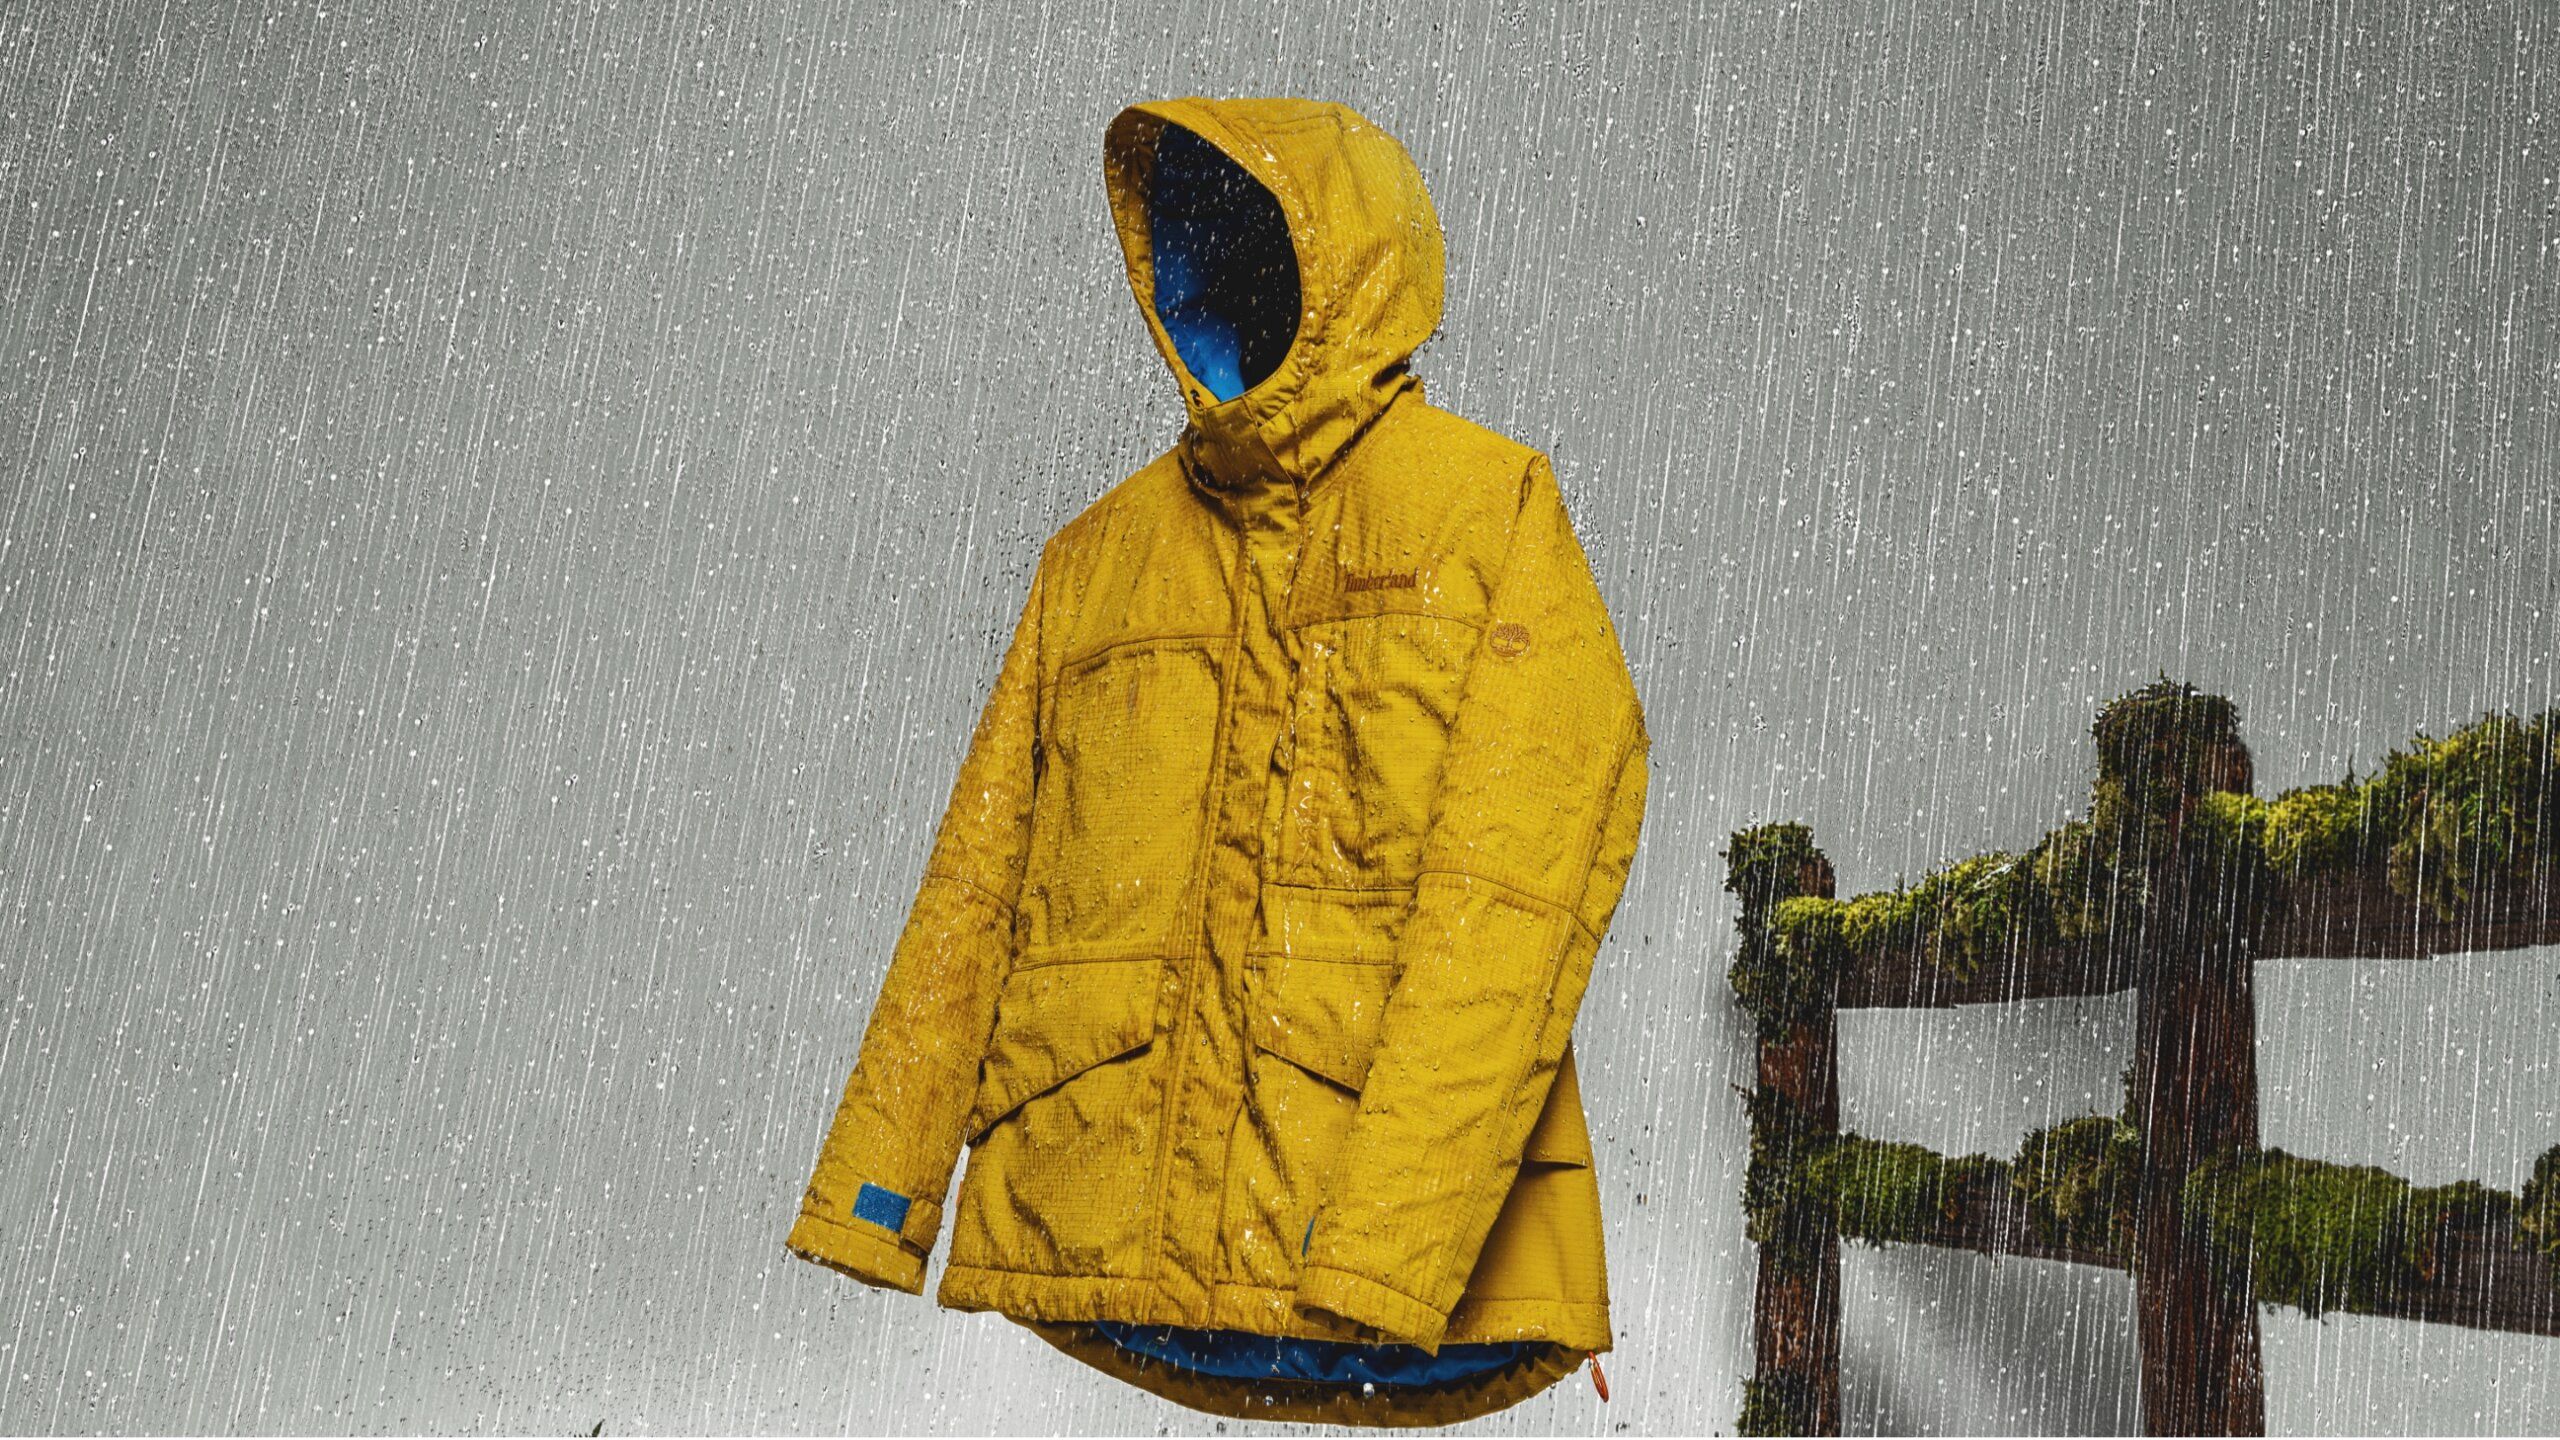 Timberland jacket hovering in air next to mossy fence in the rain